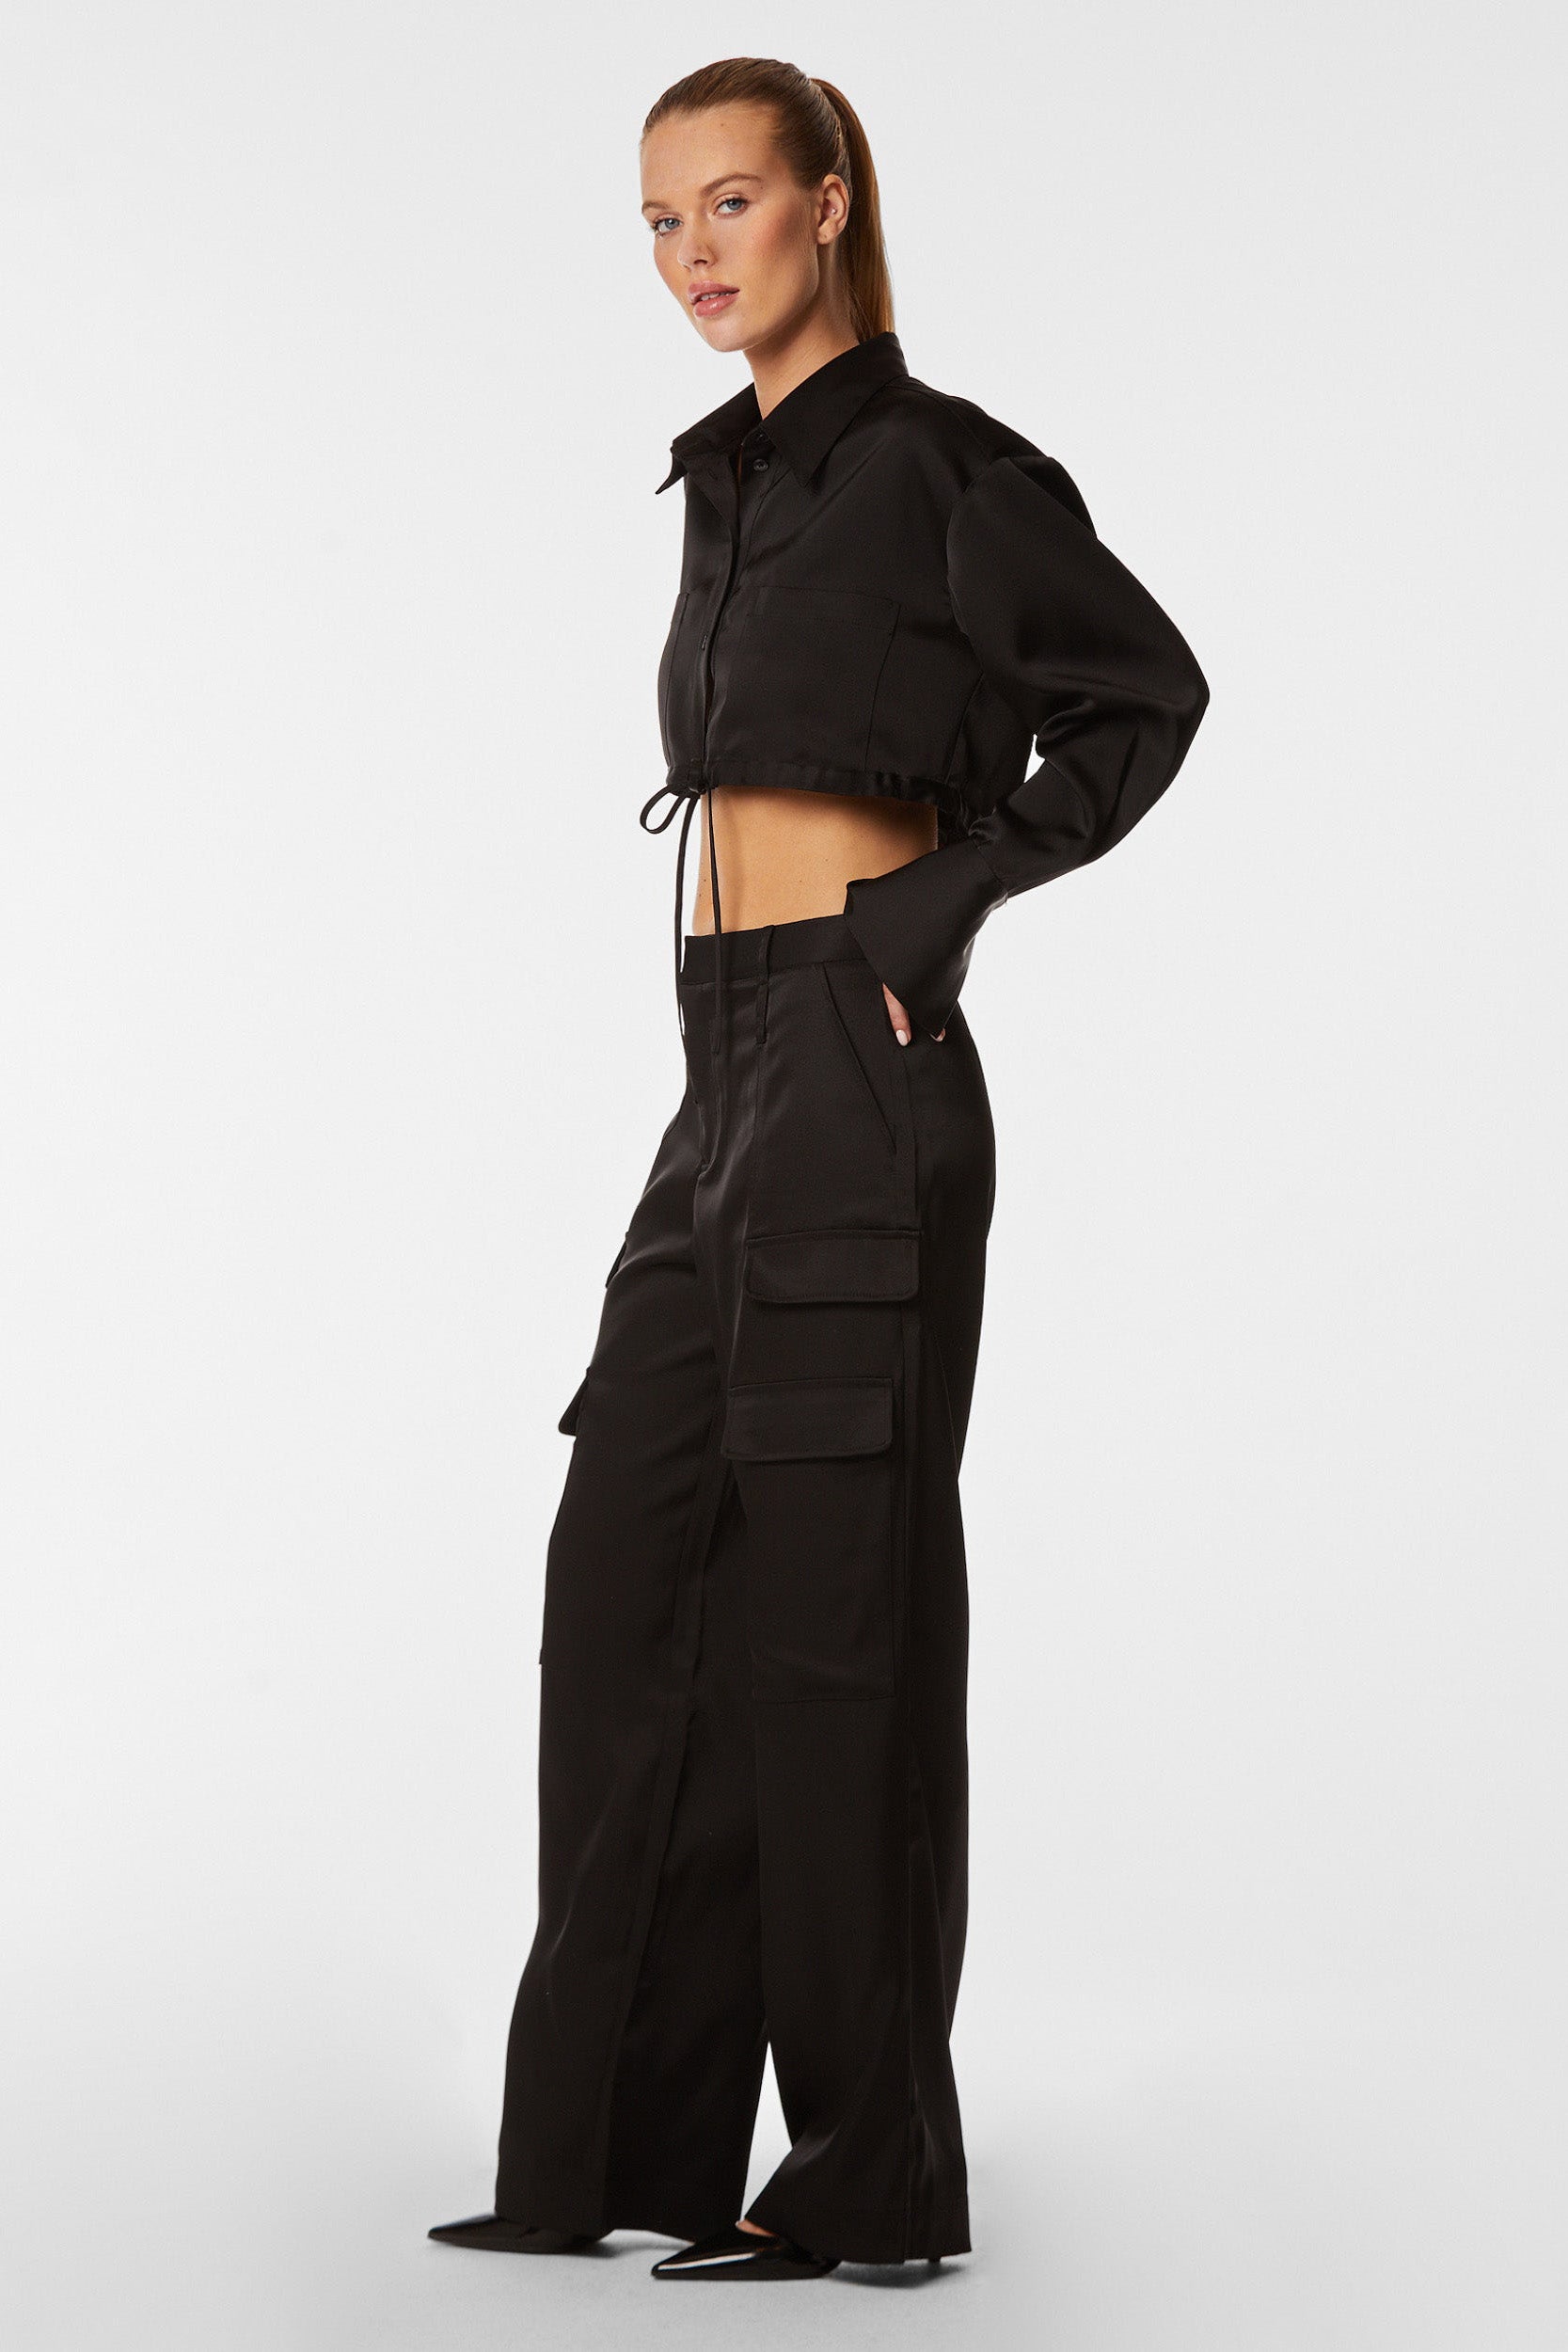 A woman with blonde hair in a ponytail is wearing a black cropped jacket and the Milan Satin Cargo Pant - Black, featuring mid-rise high-waist and side pockets, made from luxurious fabric. She stands against a white background, looking slightly to her left with her hands in her pockets.